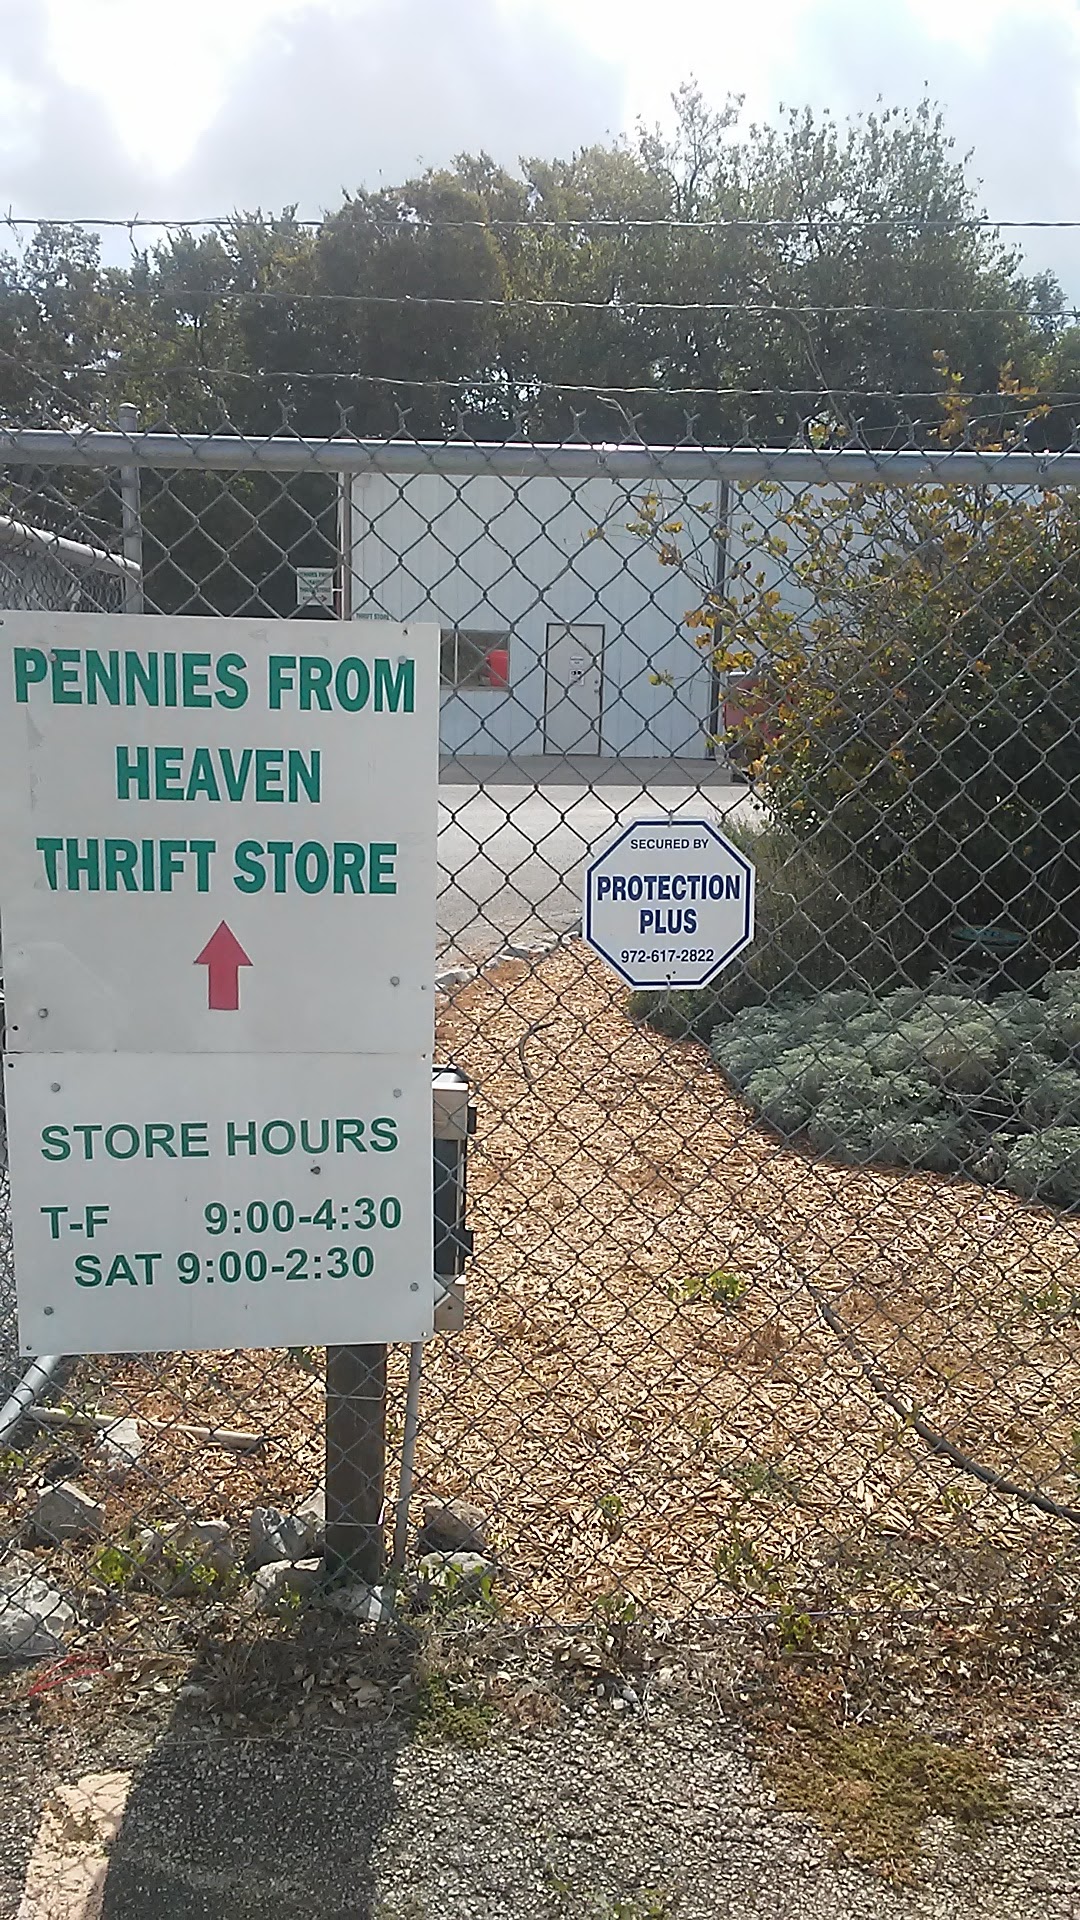 Pennies From Heaven Thrift Store